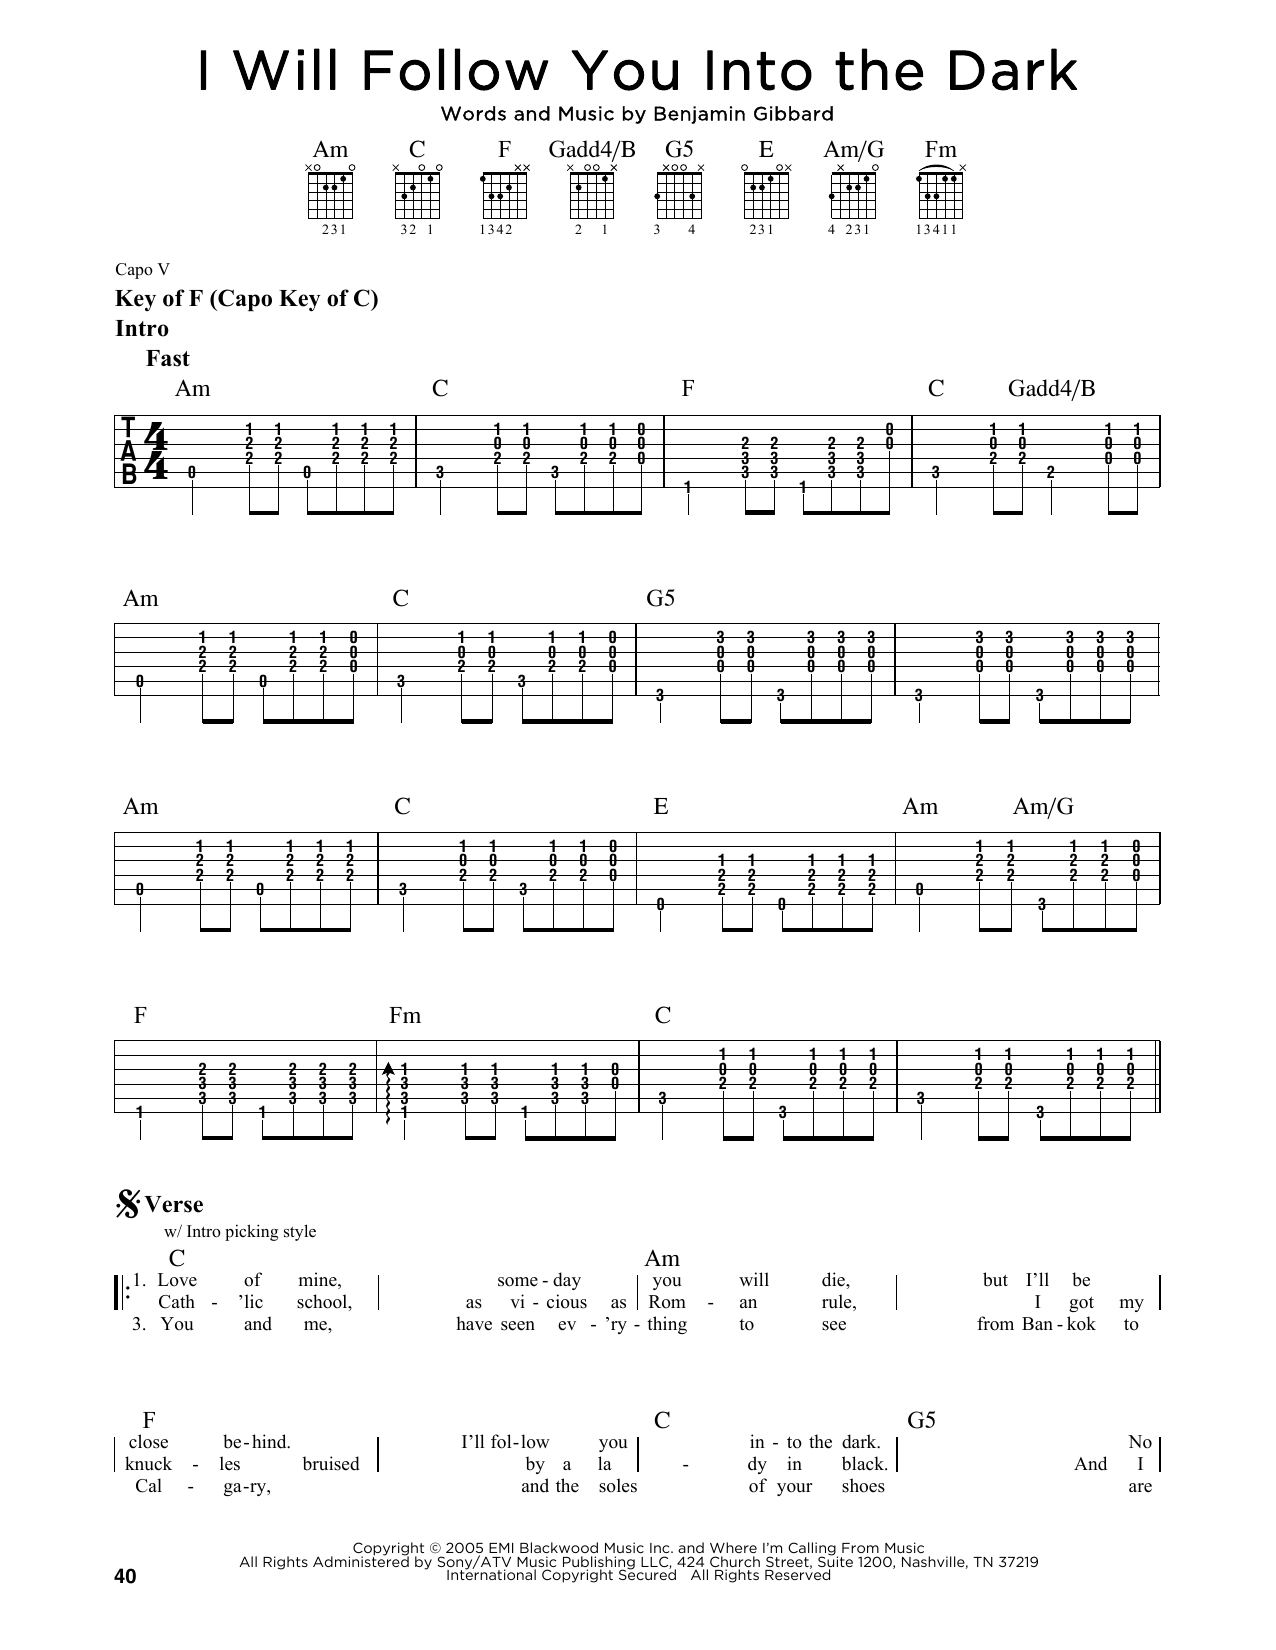 Download Death Cab For Cutie I Will Follow You Into The Dark Sheet Music